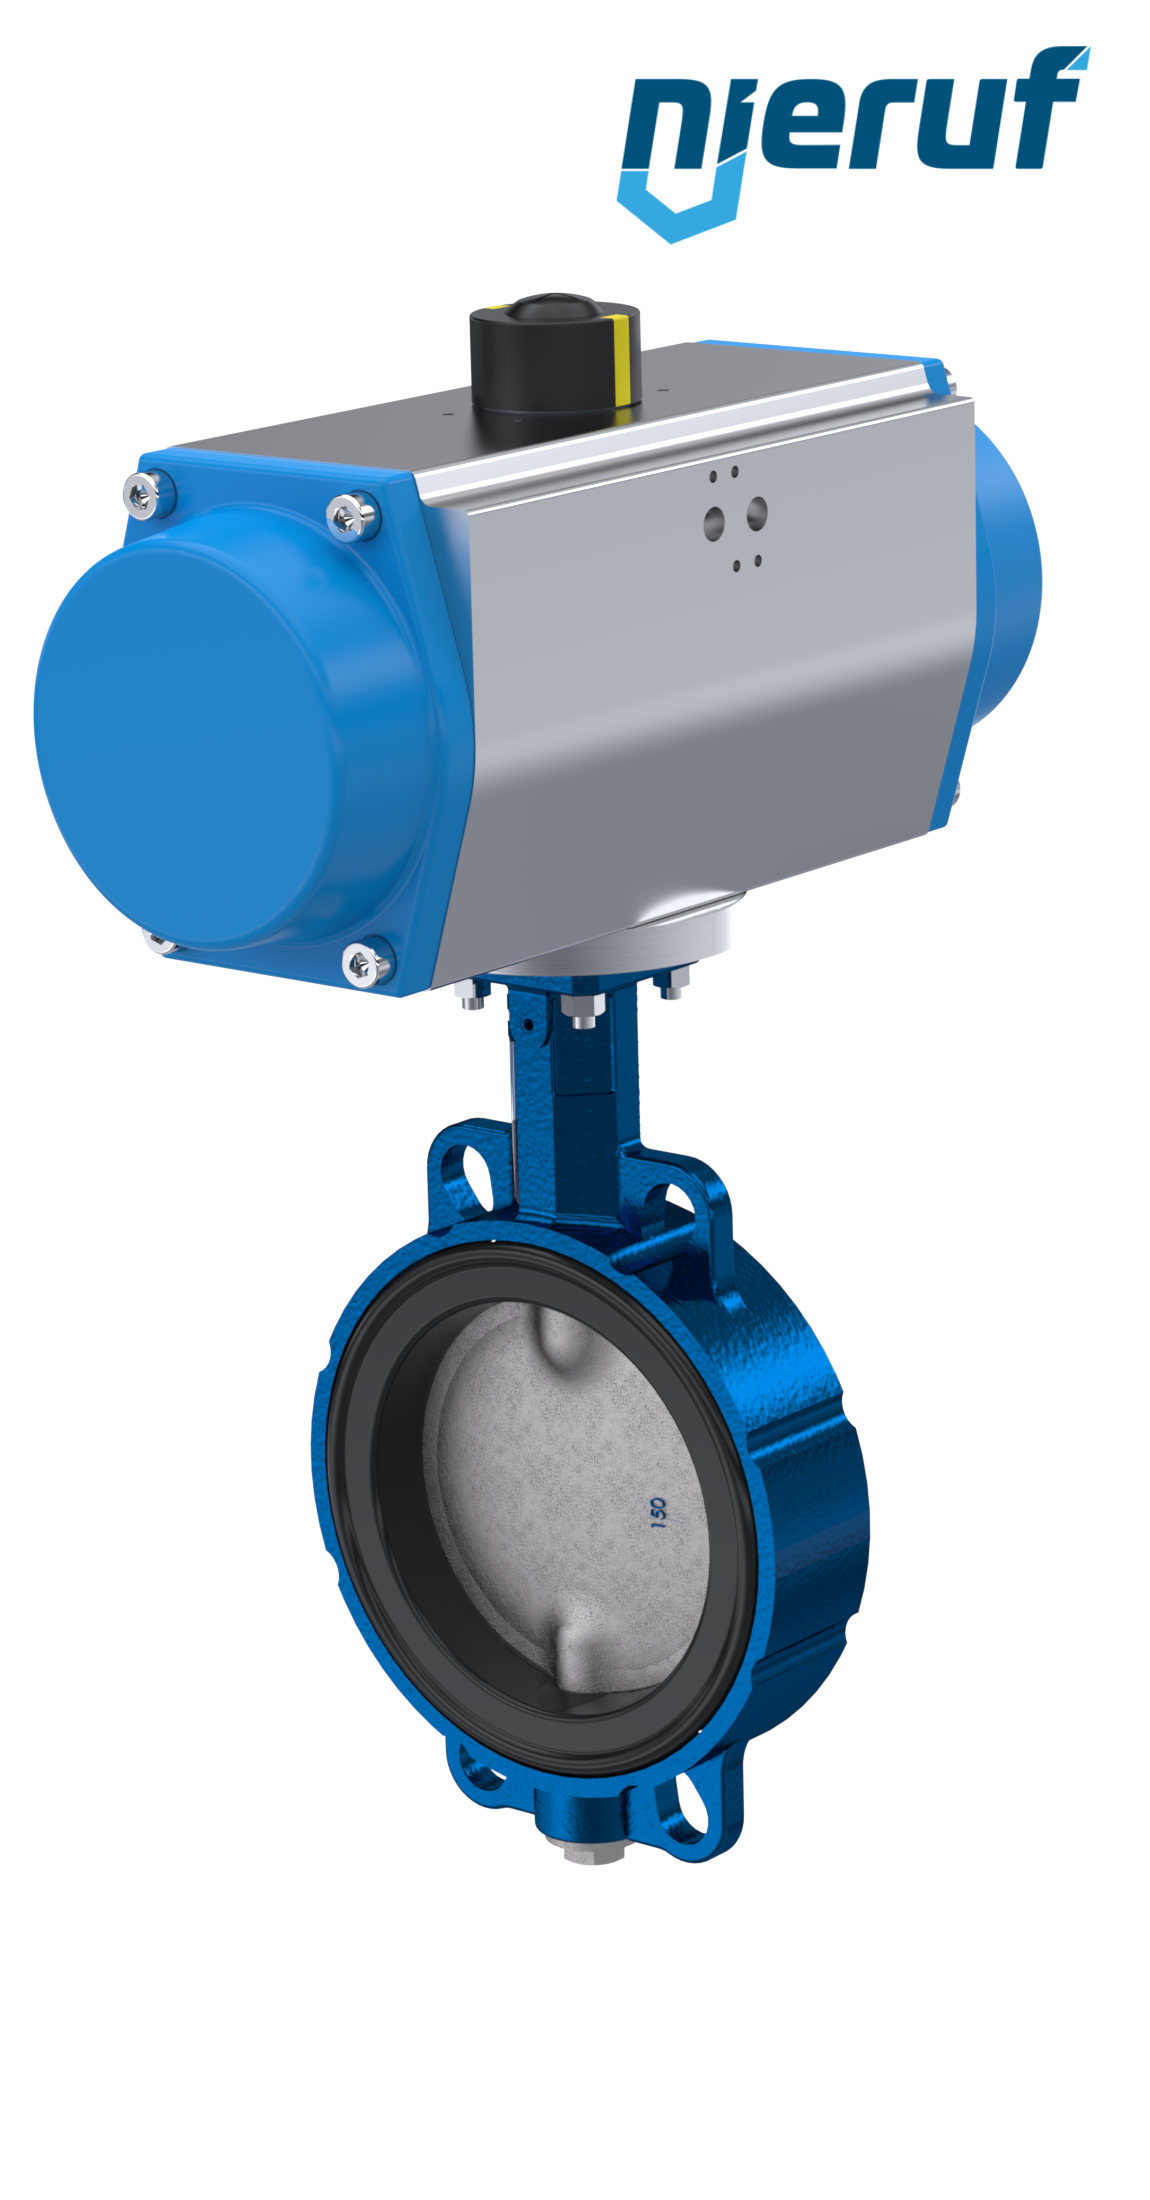 Butterfly valve DN 150 AK01 EPDM DVGW drinking water, WRAS, ACS, W270 pneumatic actuator single acting